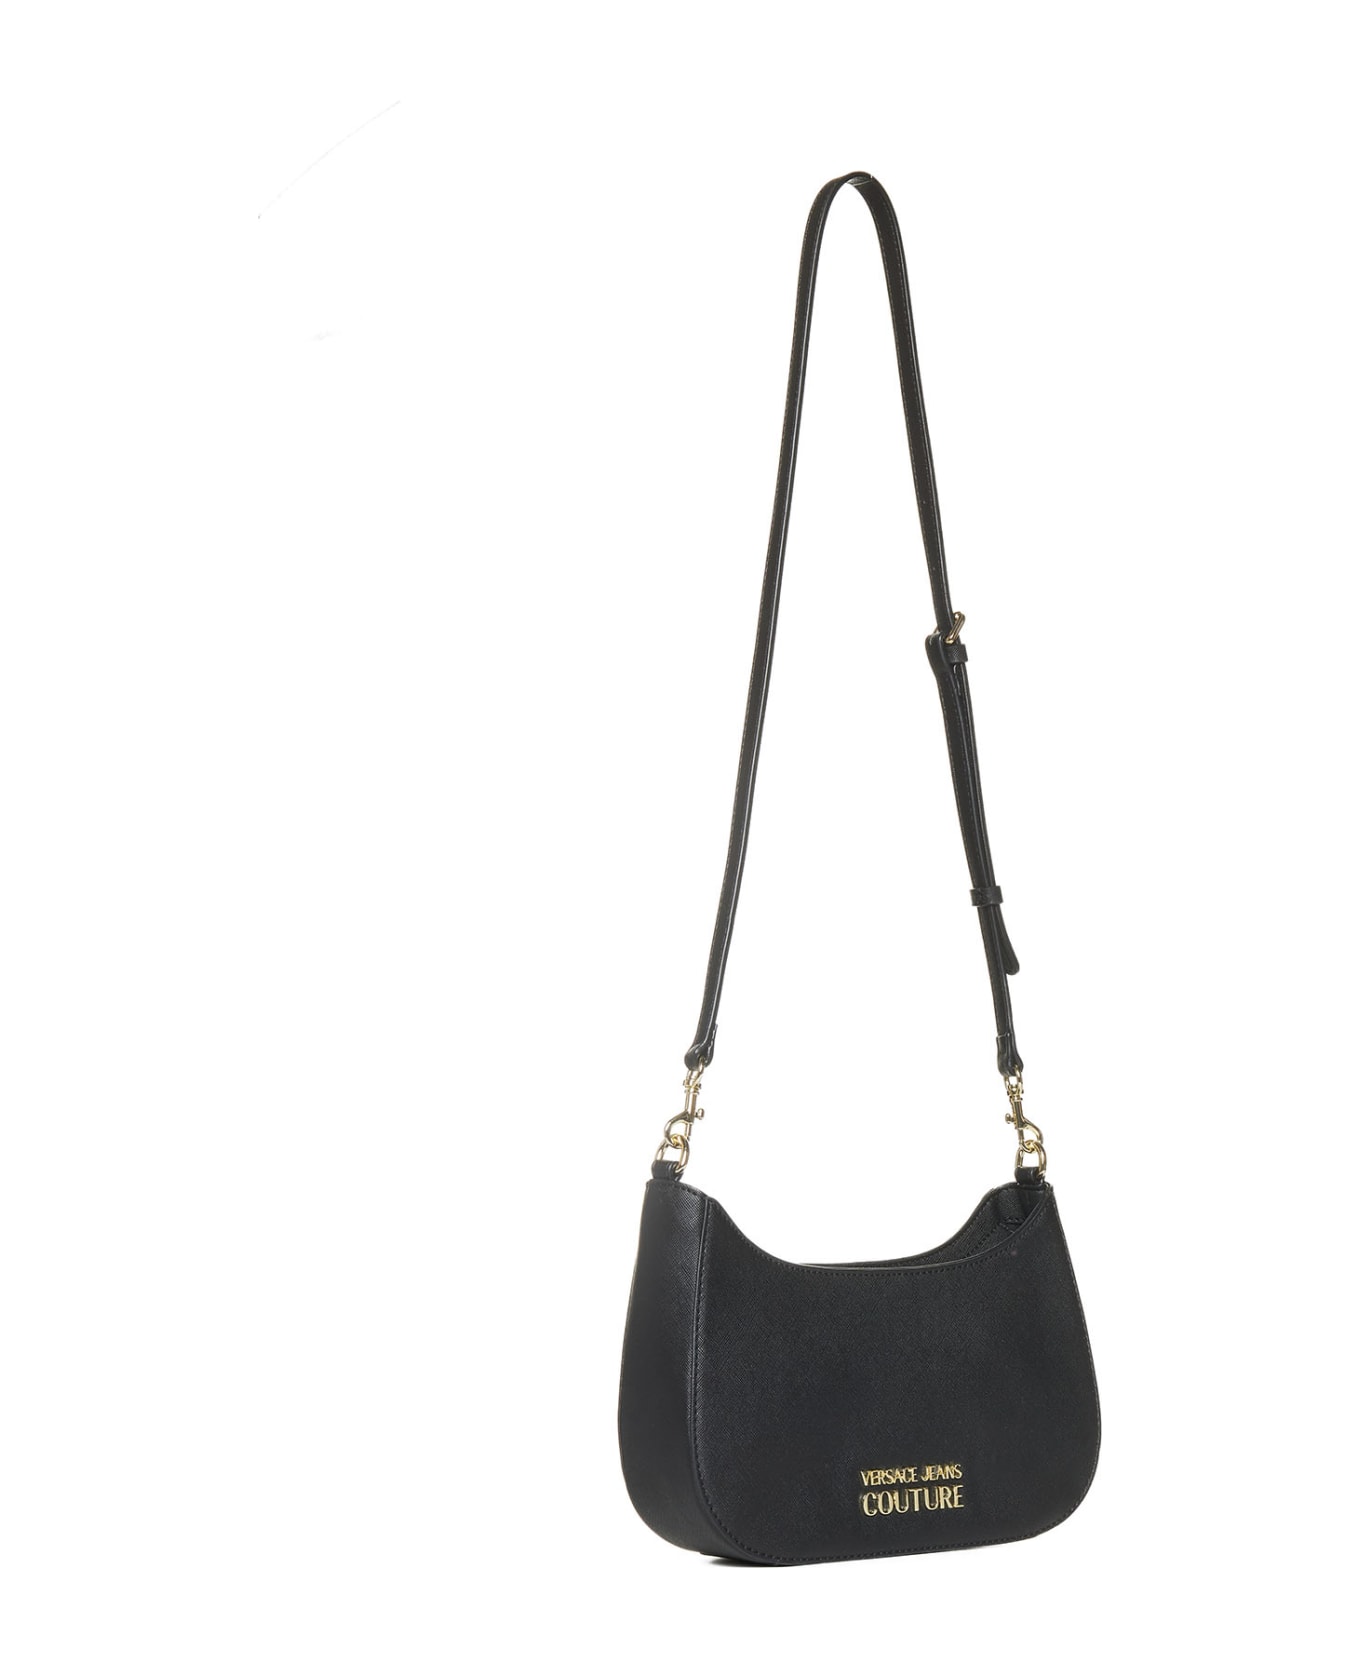 Versace Jeans Couture Thelma Classic Bag - Black トートバッグ